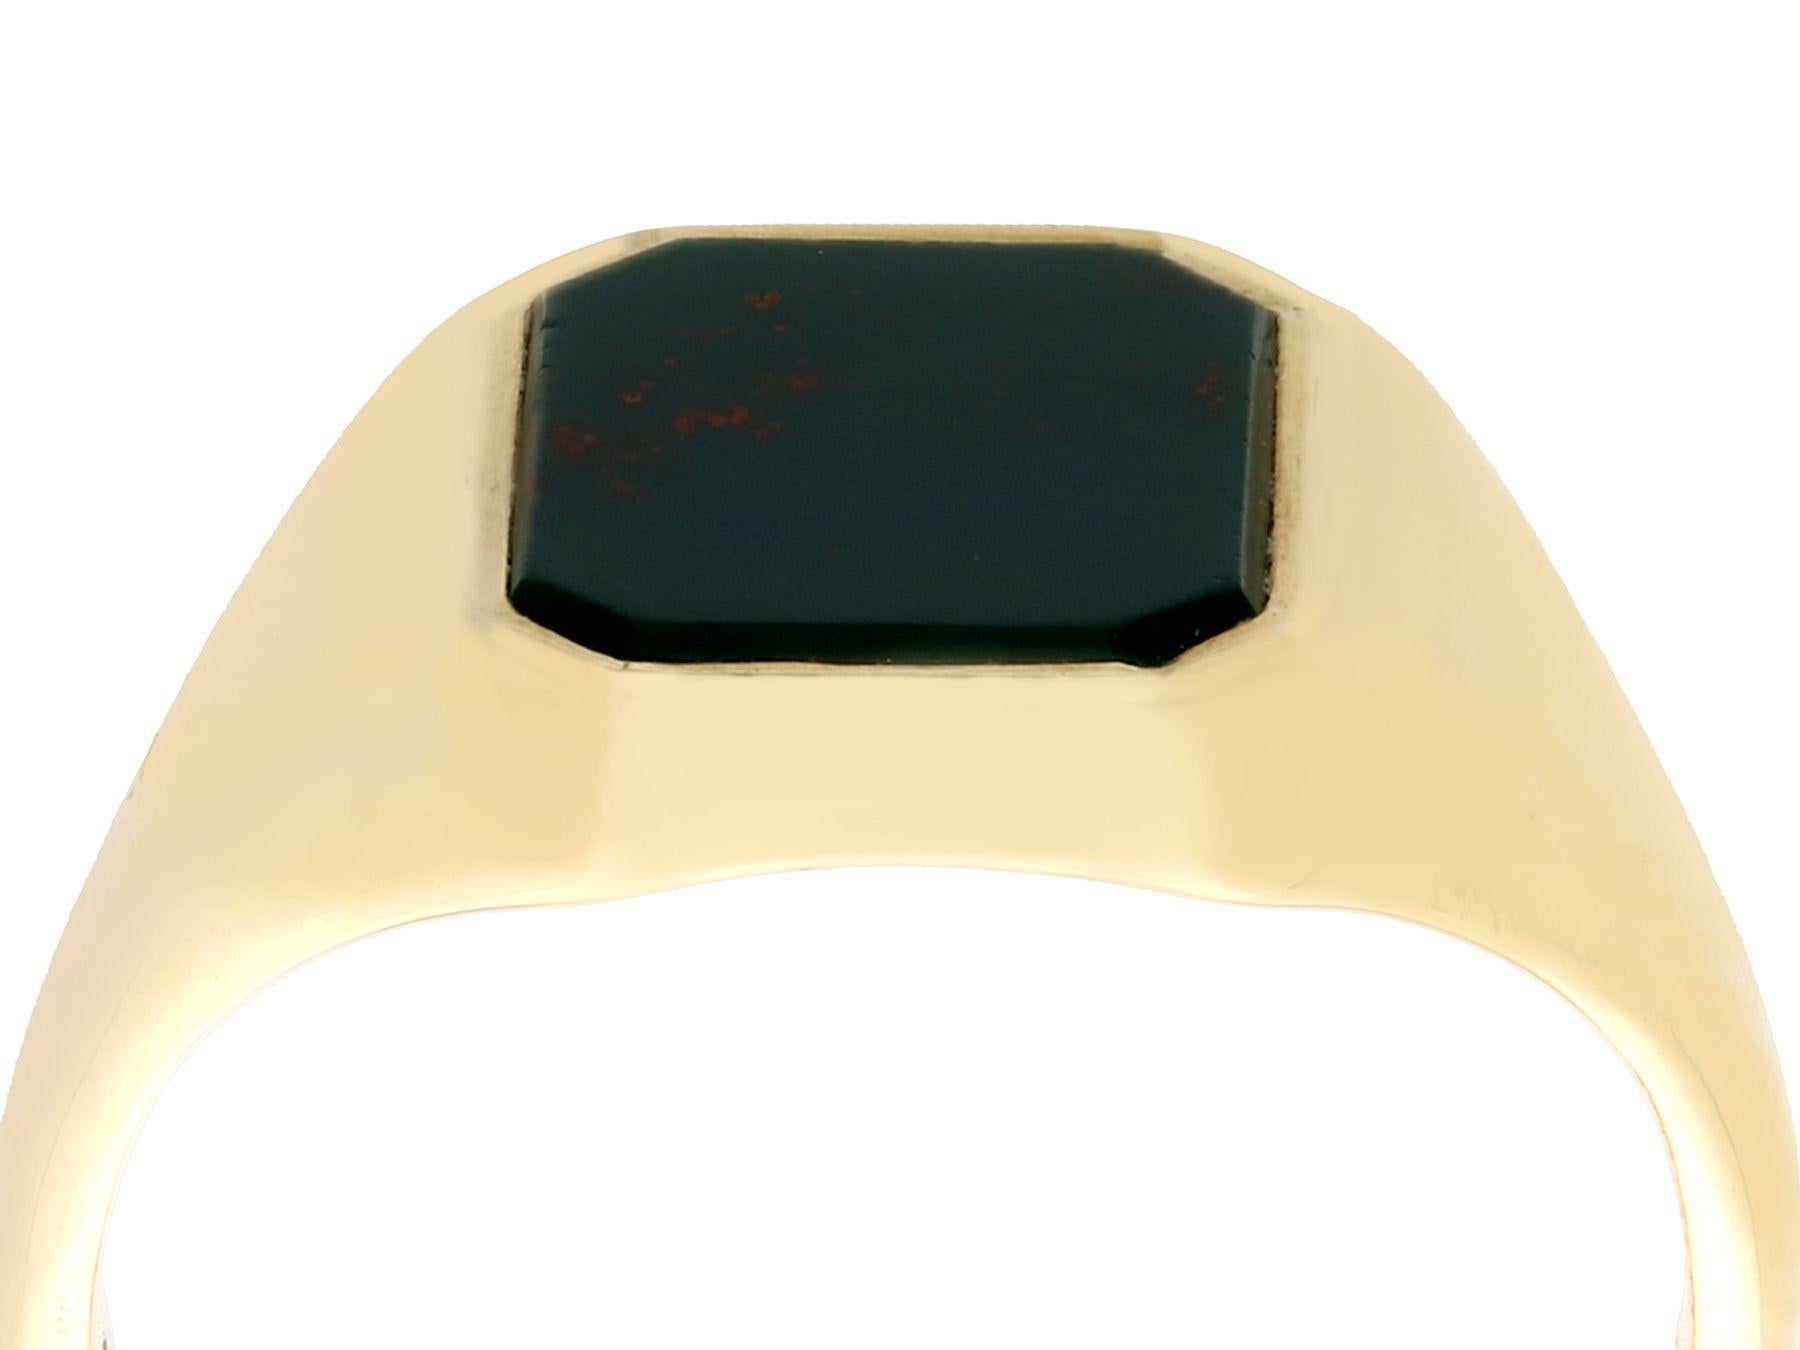 A fine and impressive vintage bloodstone and 9 karat yellow gold signet ring; part of our diverse antique jewelry and estate jewelry collections.

This fine and impressive vintage signet ring has been crafted in 9k yellow gold.

The ring displays a